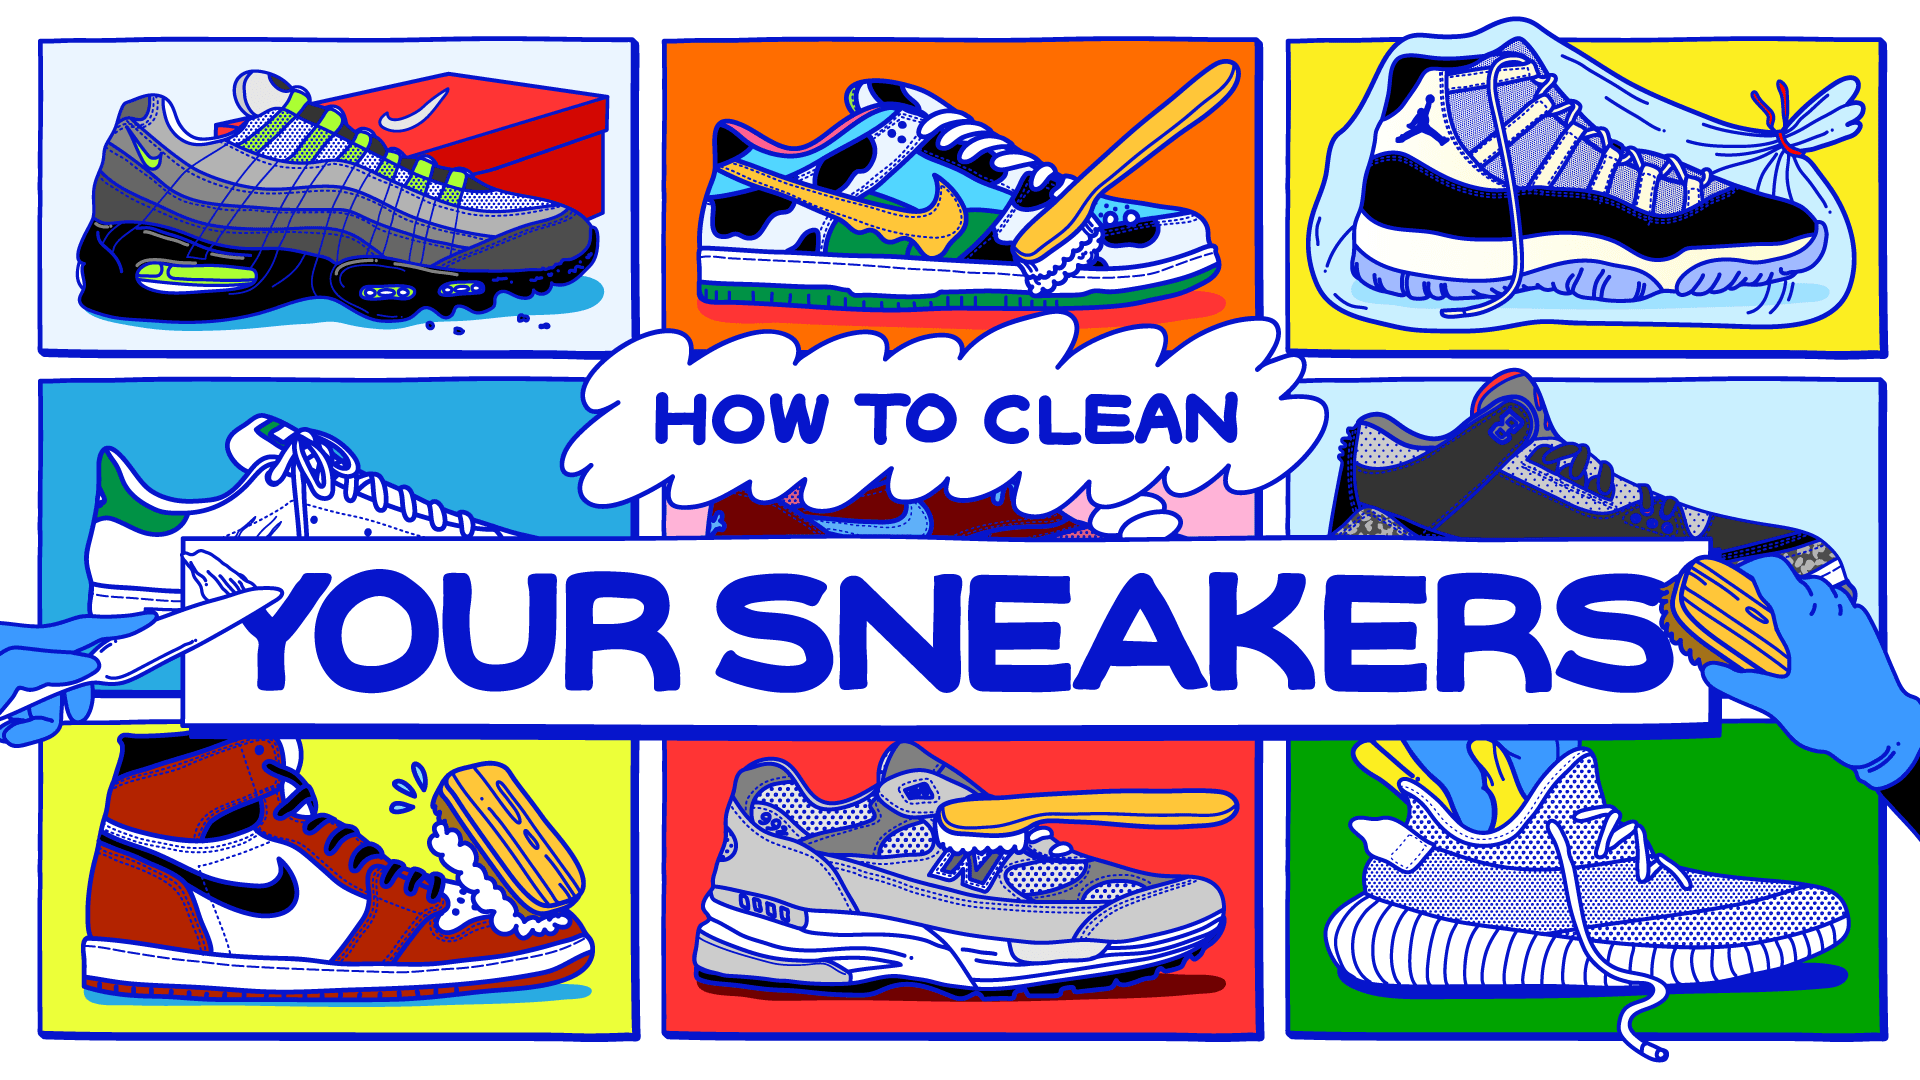 How to Clean Sneakers